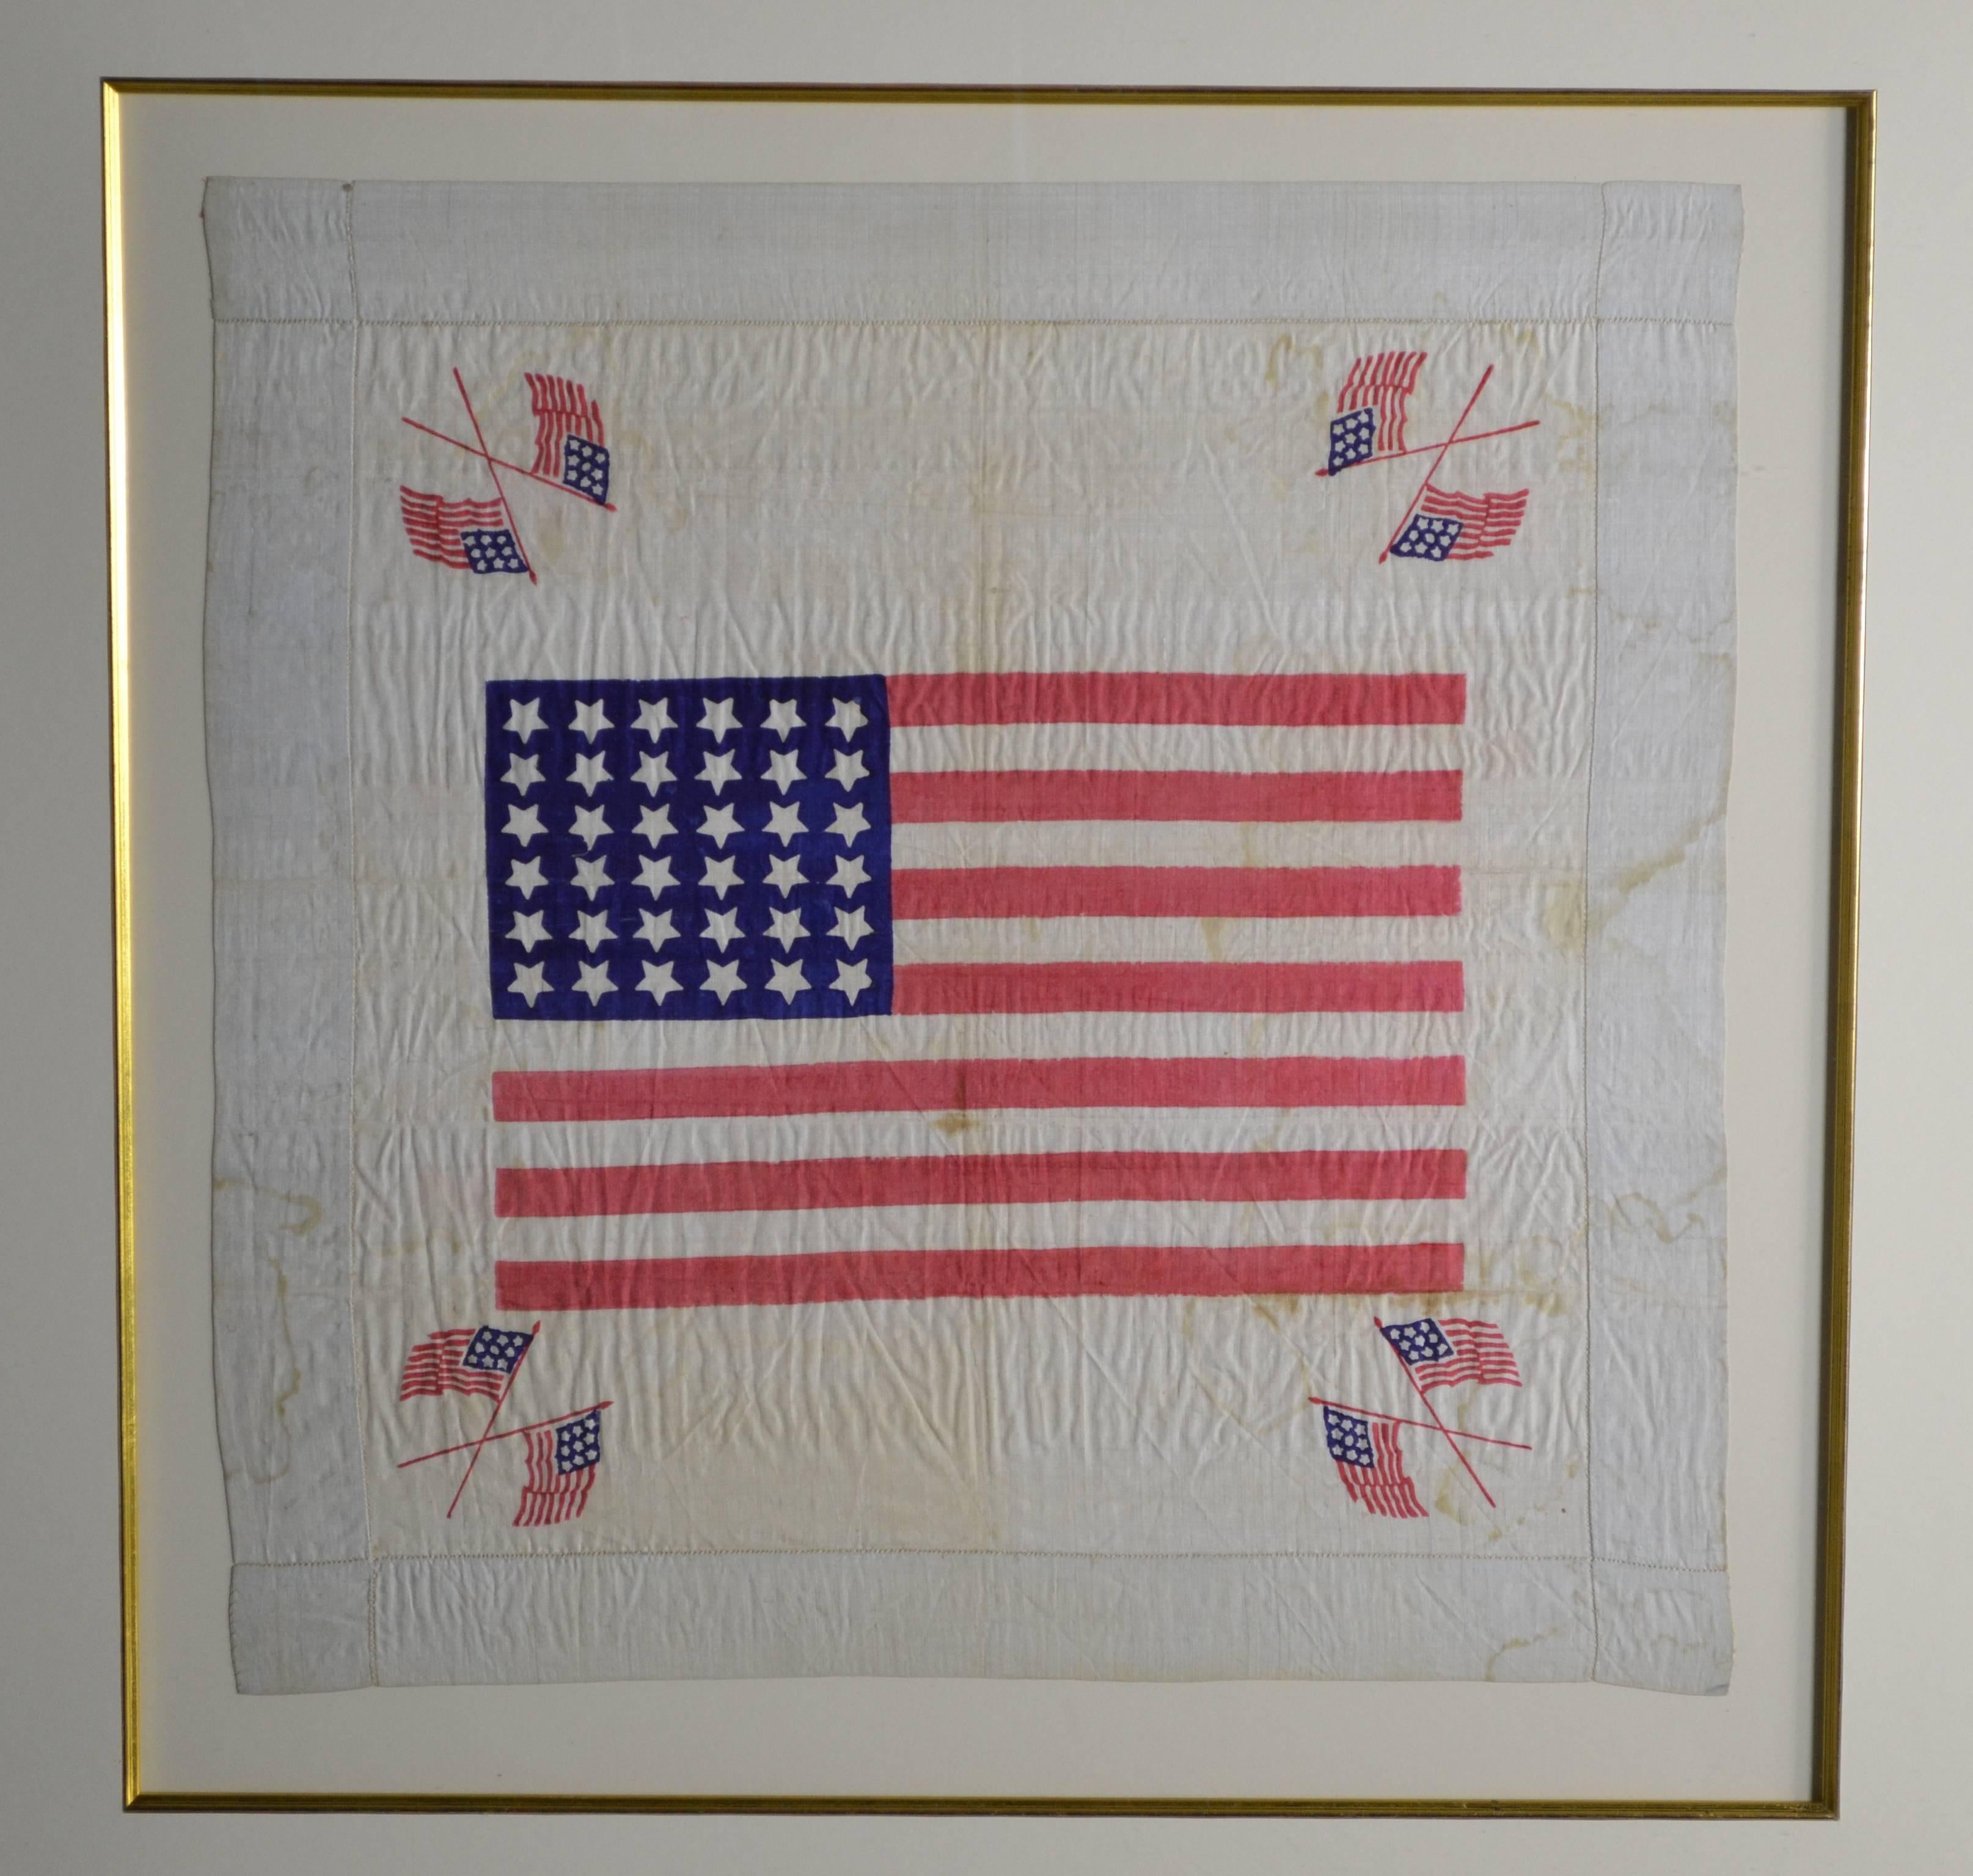 Rare 36 star Presidential Campaign textile for Abraham Lincoln during the Civil War. For his 2nd election. Made of Fine silk with delicate Fine stitching as seen in the photos. Beautiful 36 star flag in the center with unusual up side down stars.